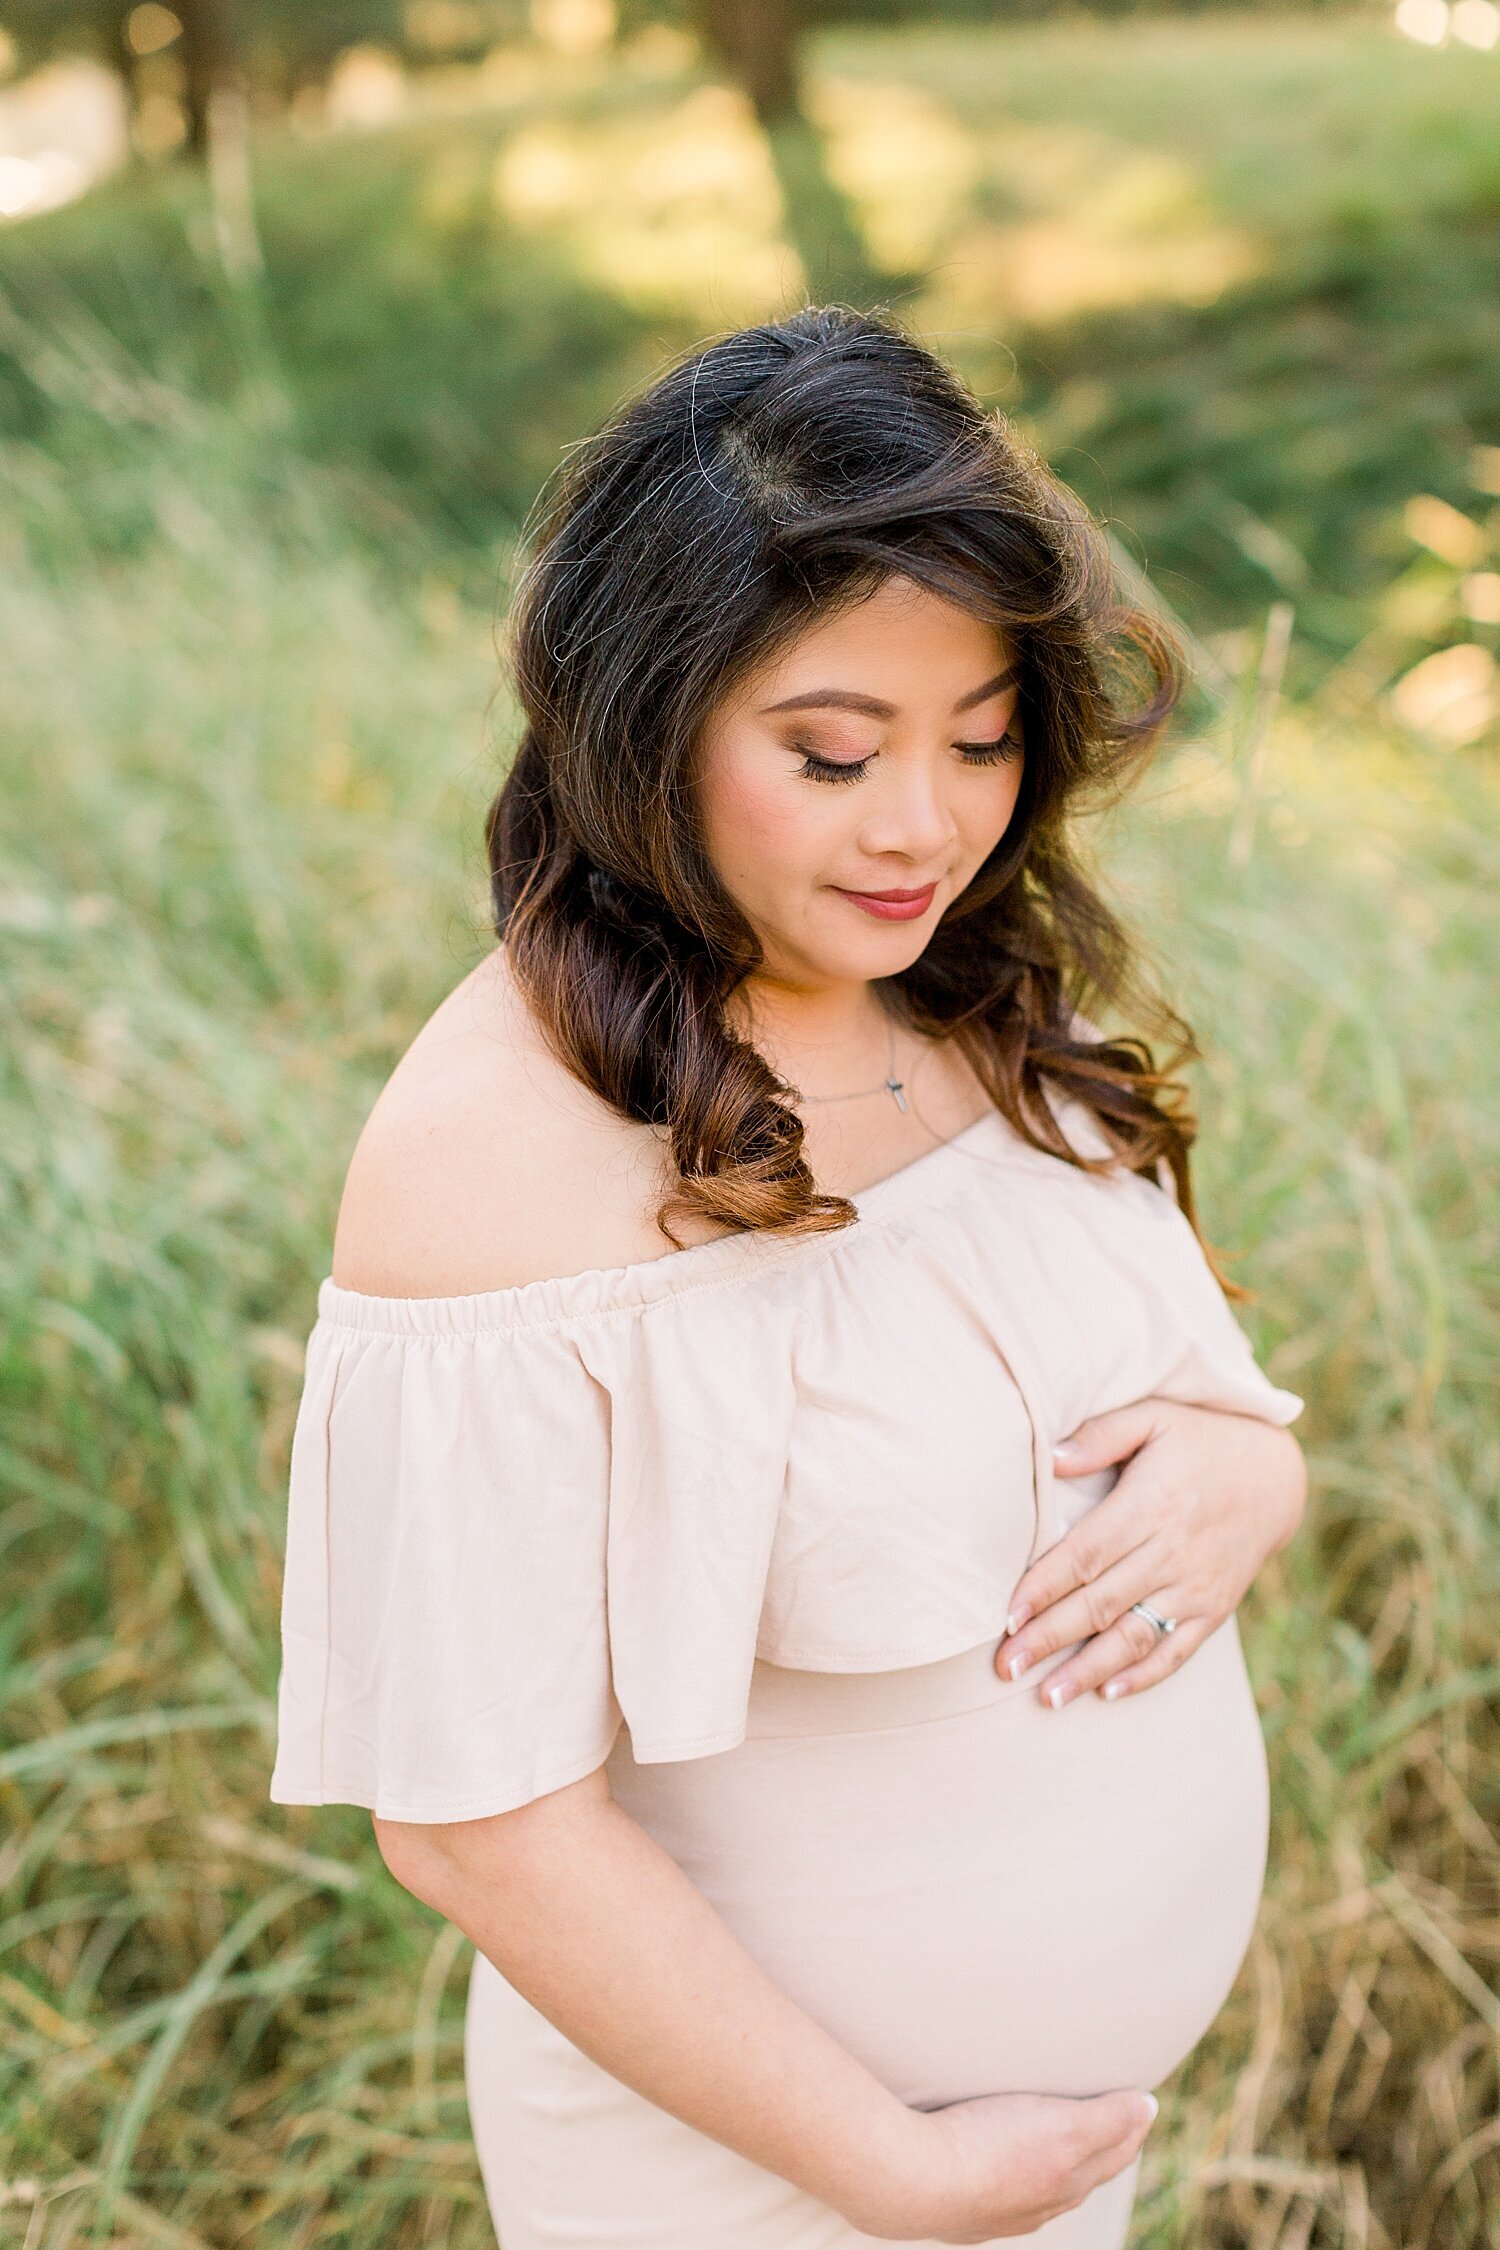 Mama looking at her baby belly during maternity session with Ambre Williams Photography.